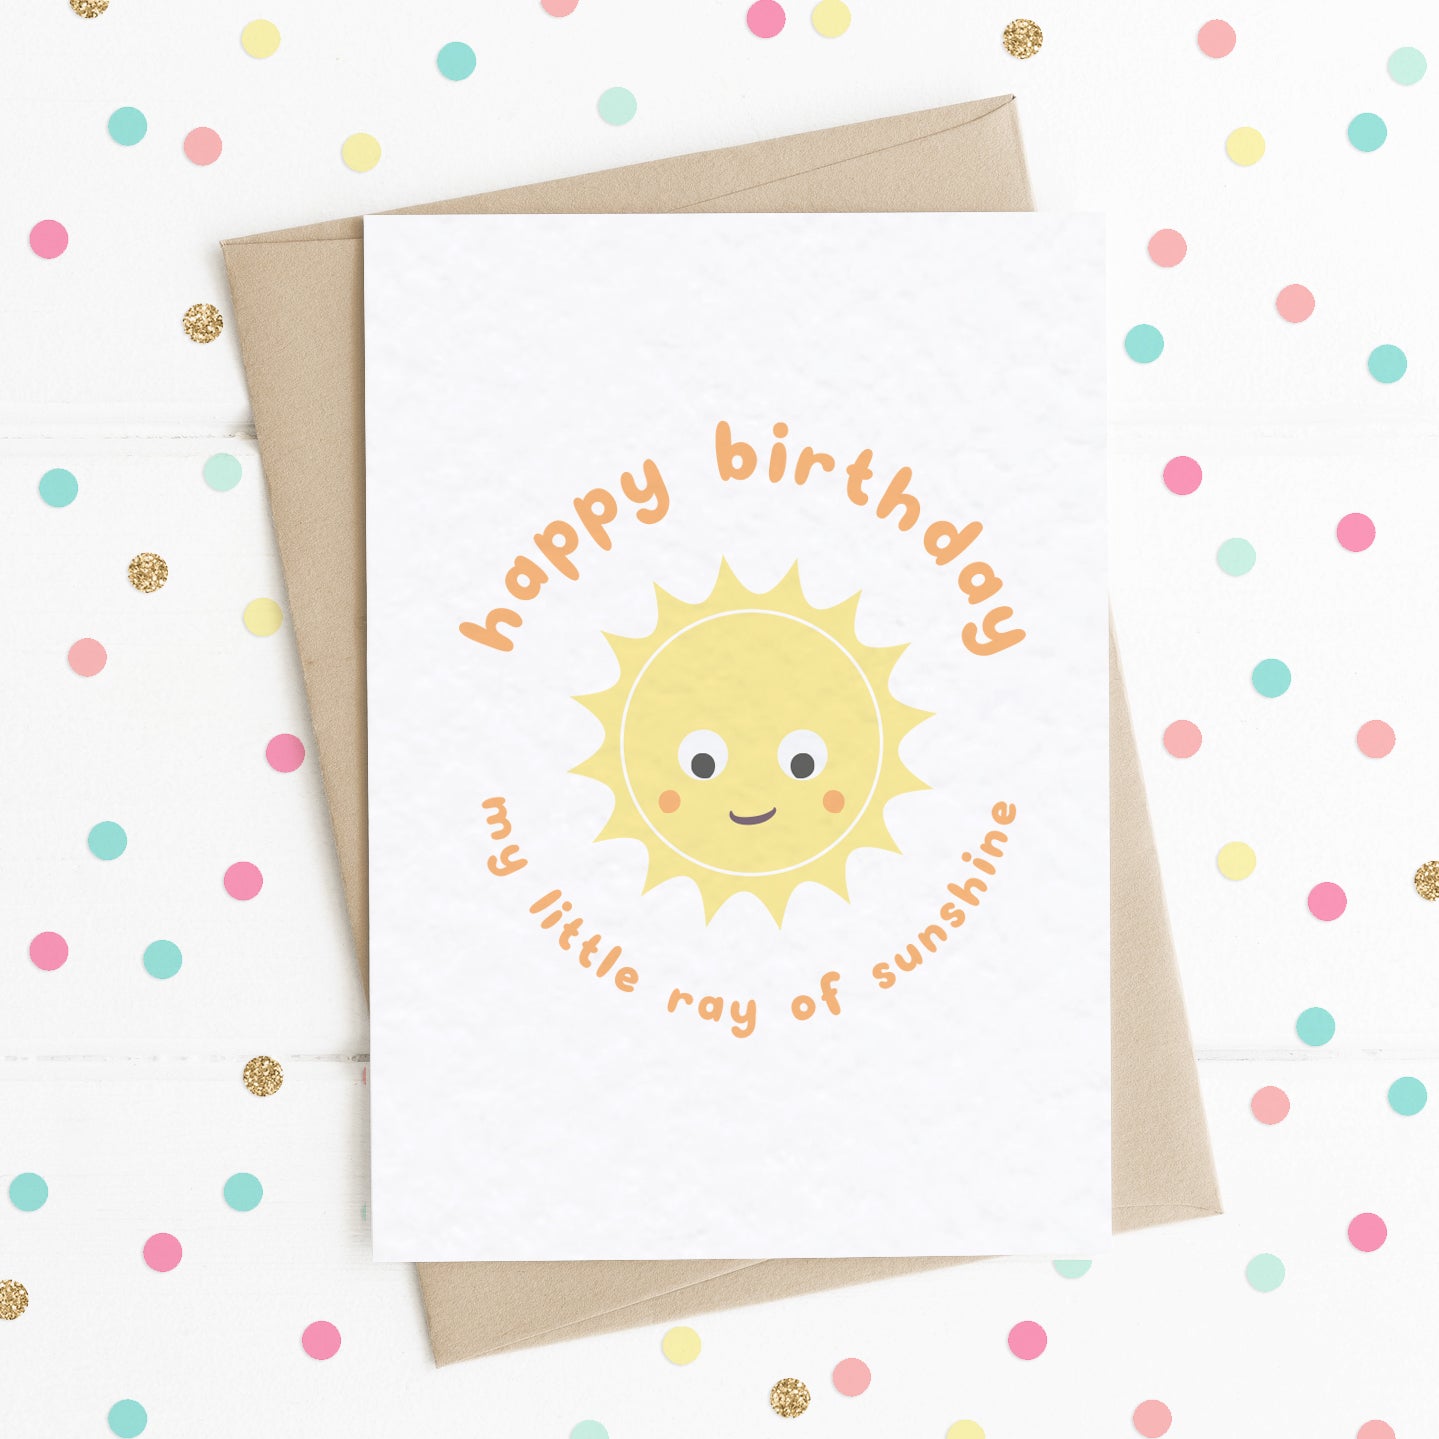 A cute birthday card with a smiling happy sun on it with the message "Happy Birthday My Little Ray Of Sunshine".